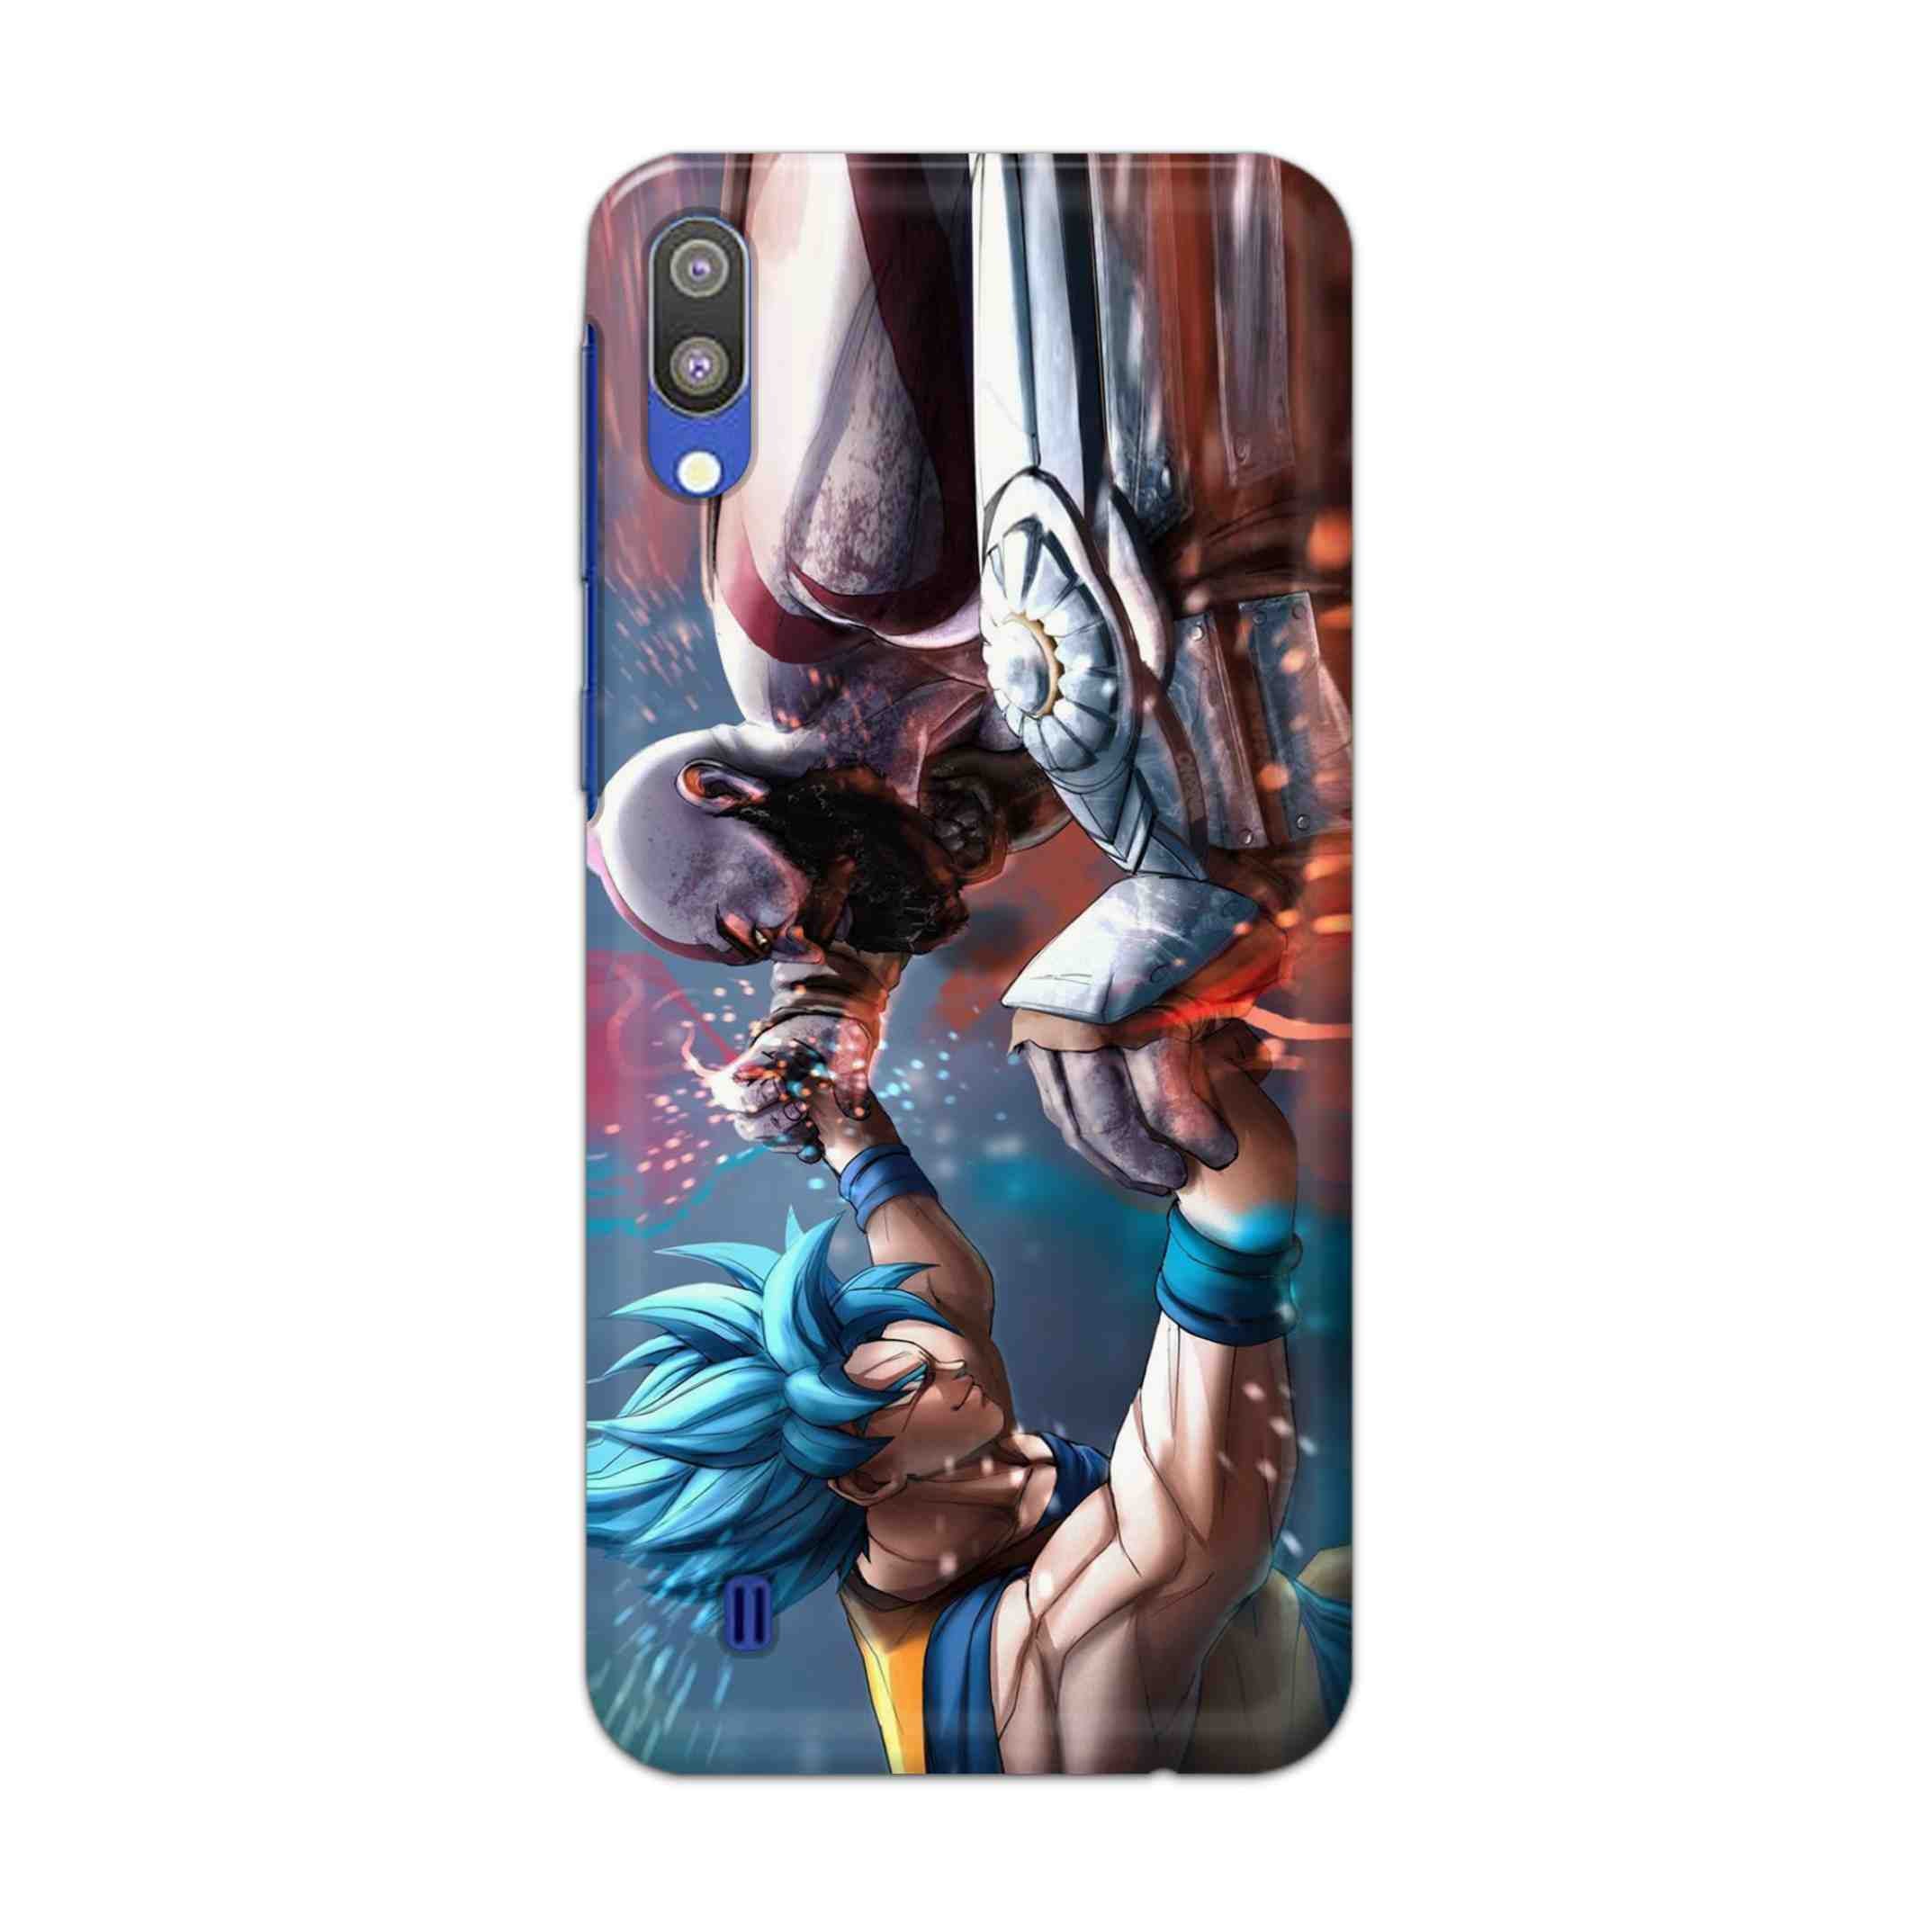 Buy Goku Vs Kratos Hard Back Mobile Phone Case Cover For Samsung Galaxy M10 Online